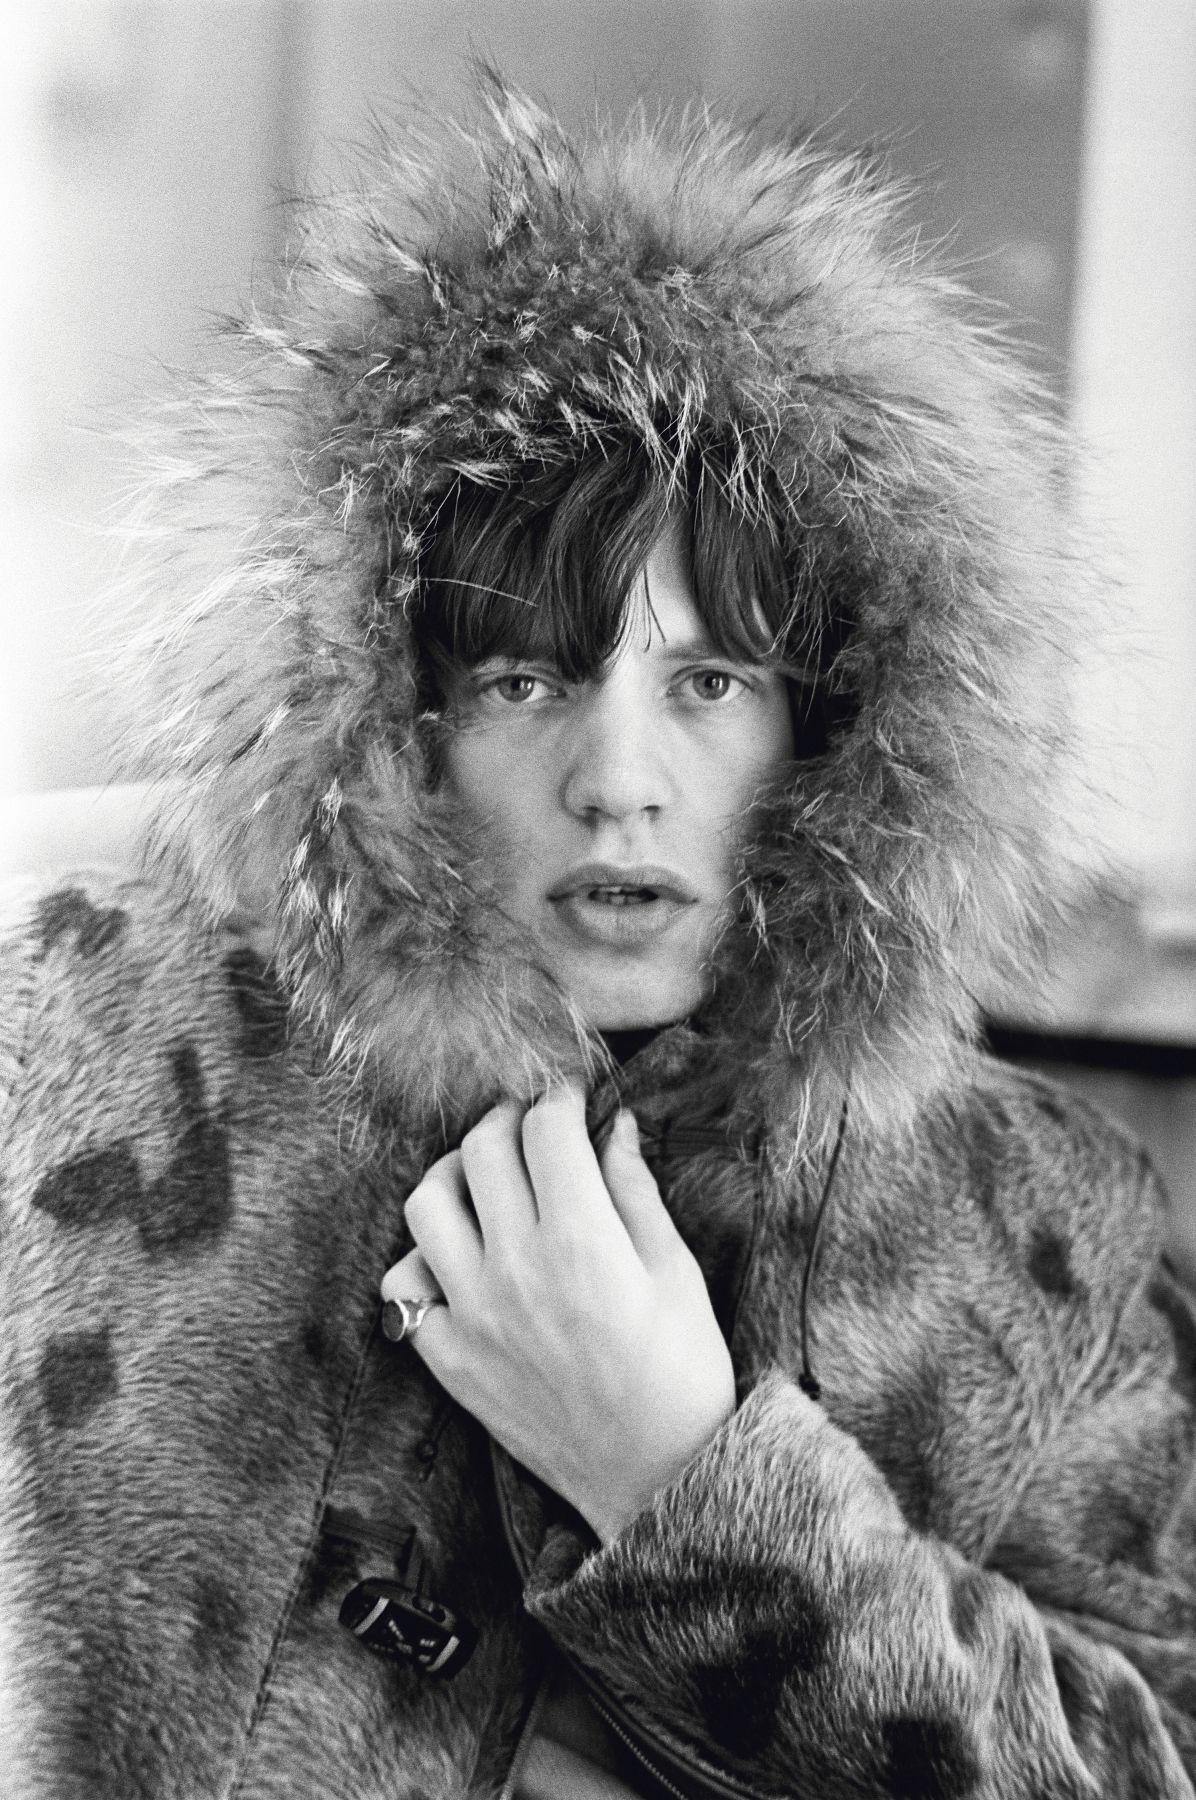 Terry O'Neill Portrait Photograph - Mick Jagger in a Fur Parka (Signed)